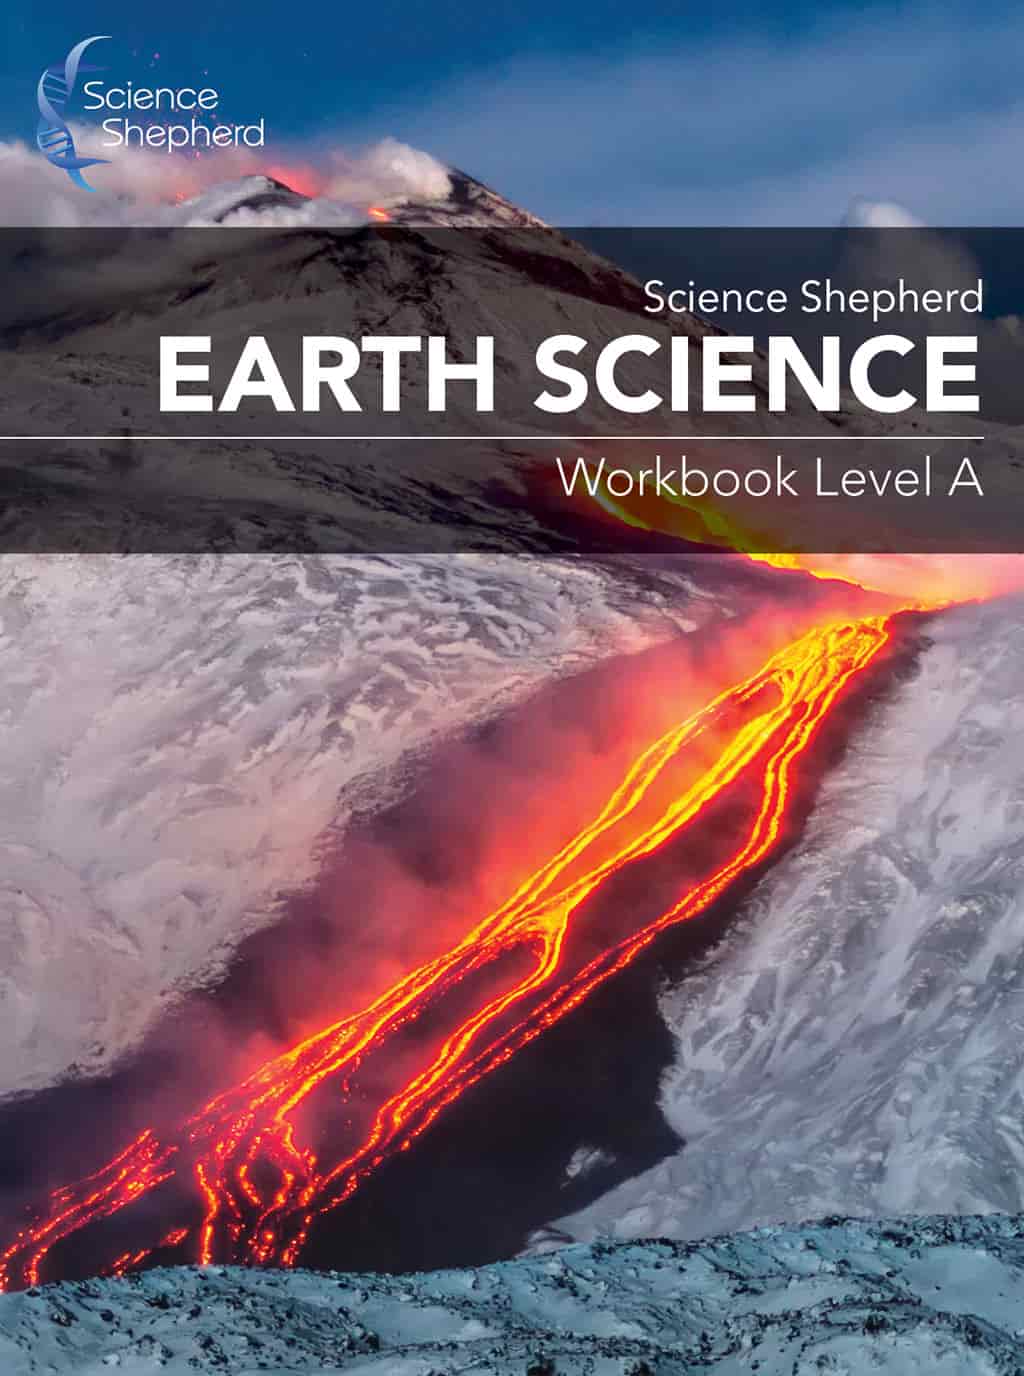 Cover for the Earth Science homeschool student Workbook Level A showing a volcano erupting.